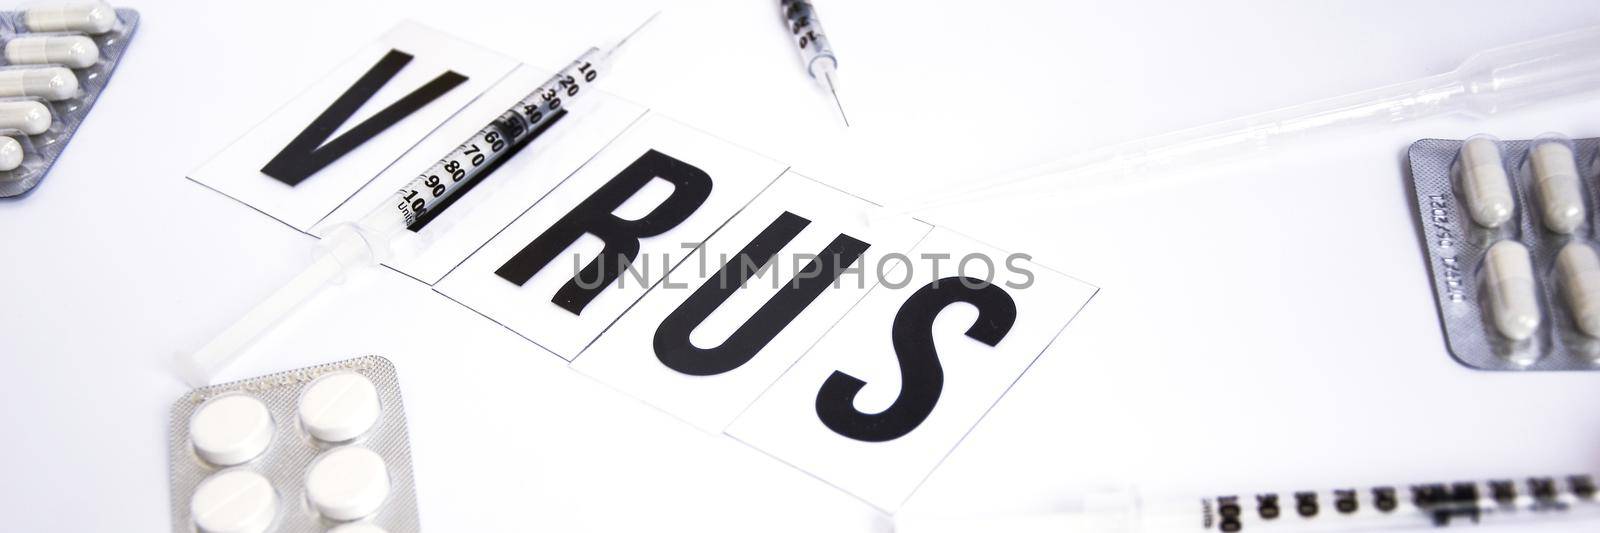 Banner The word virus on a white background with syringe pills, medicines, Health concept, Chinese 2019 coronavirus